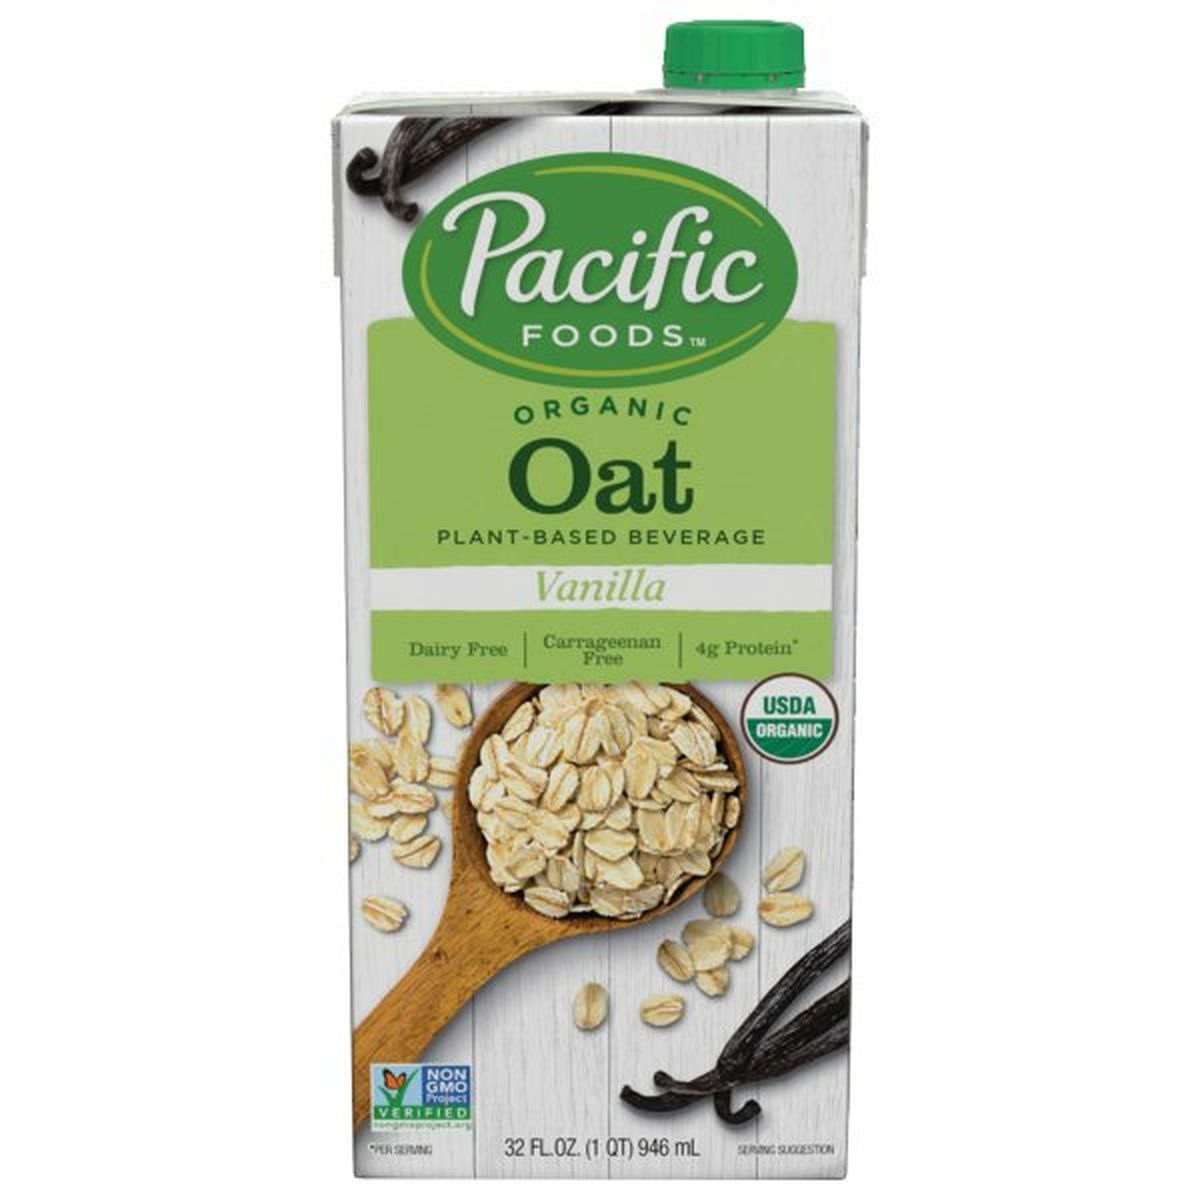 Calories in Pacific Plant-Based Beverage, Oat, Organic, Vanilla